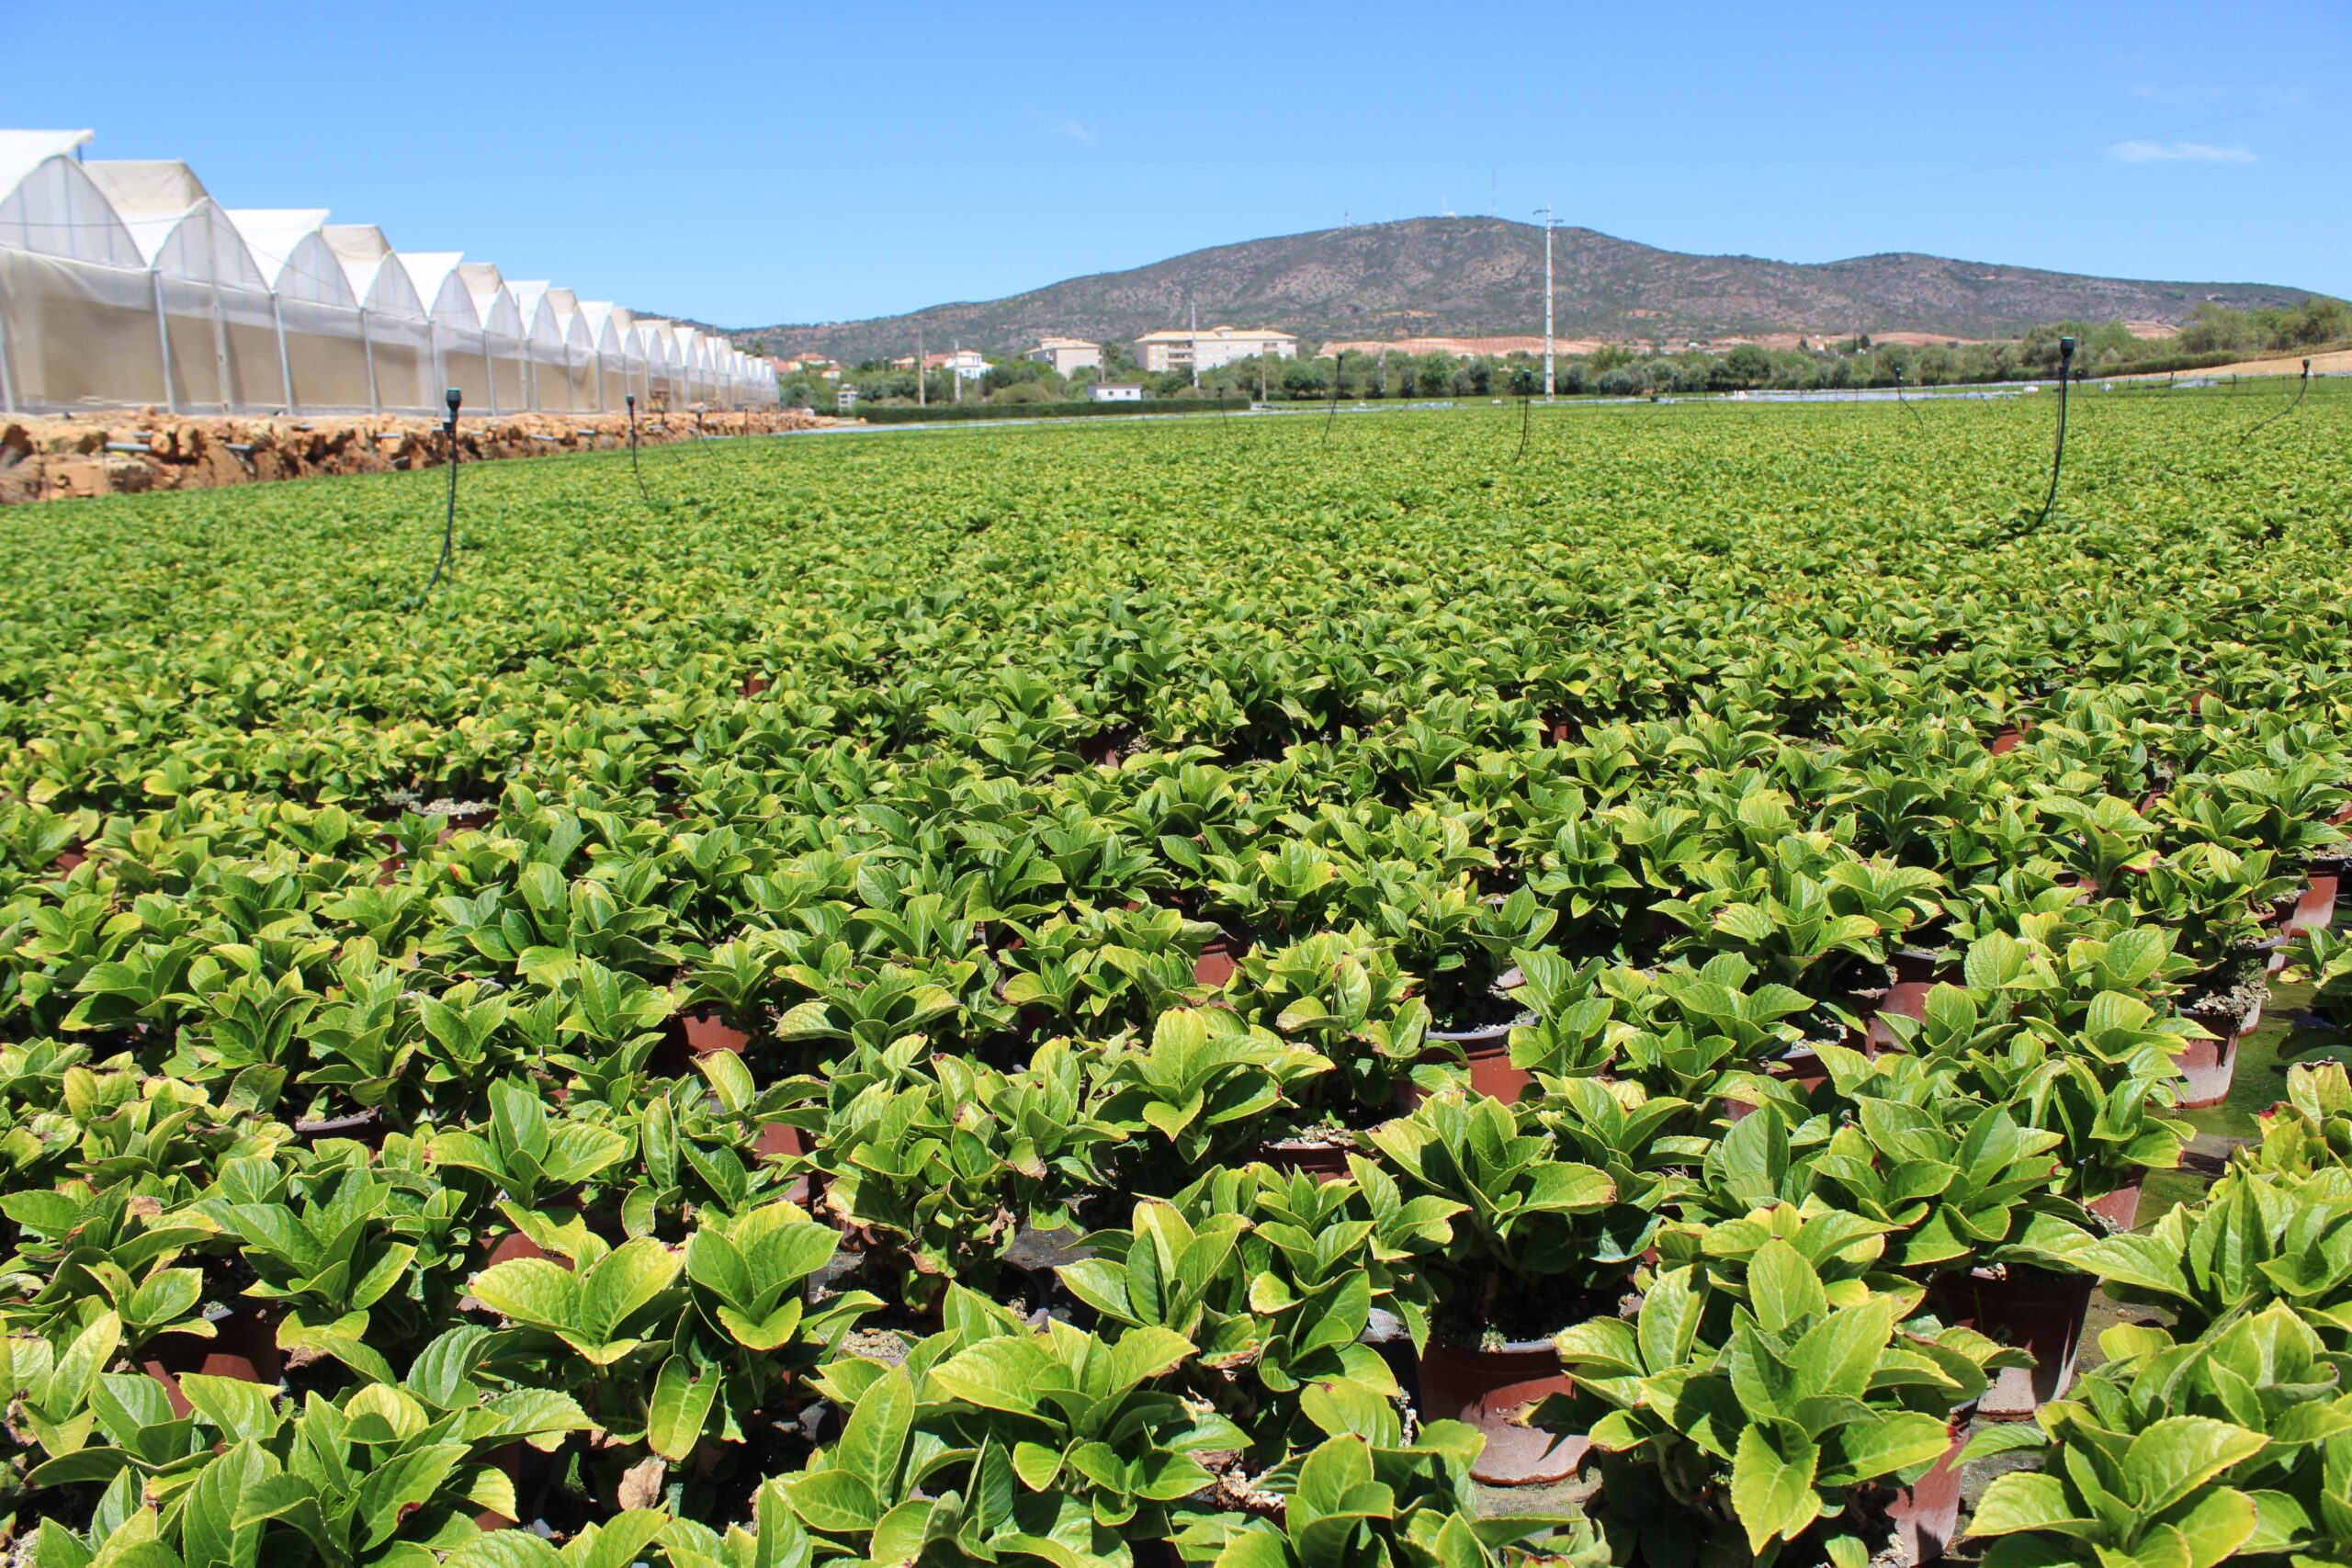 Schroll-Flowers group company produces 36 hectares of hydrangeas in Olhão